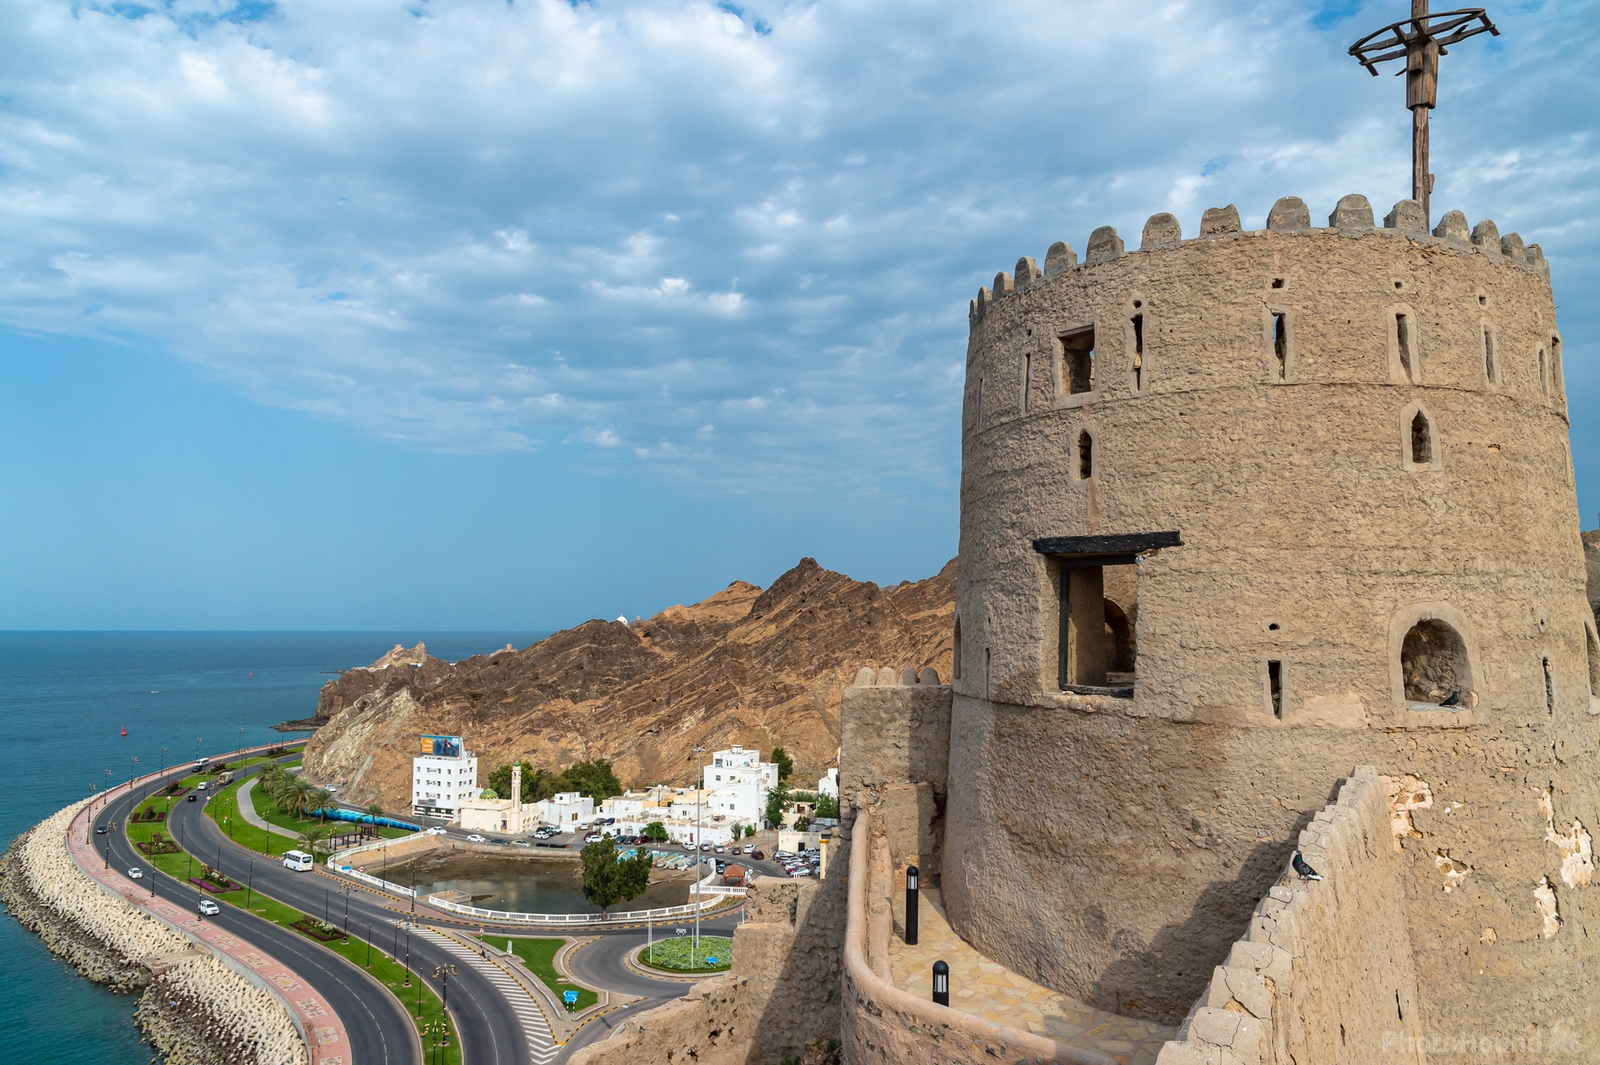 Image of Views from Mutrah Fort (قلعة مطرح) by Sue Wolfe